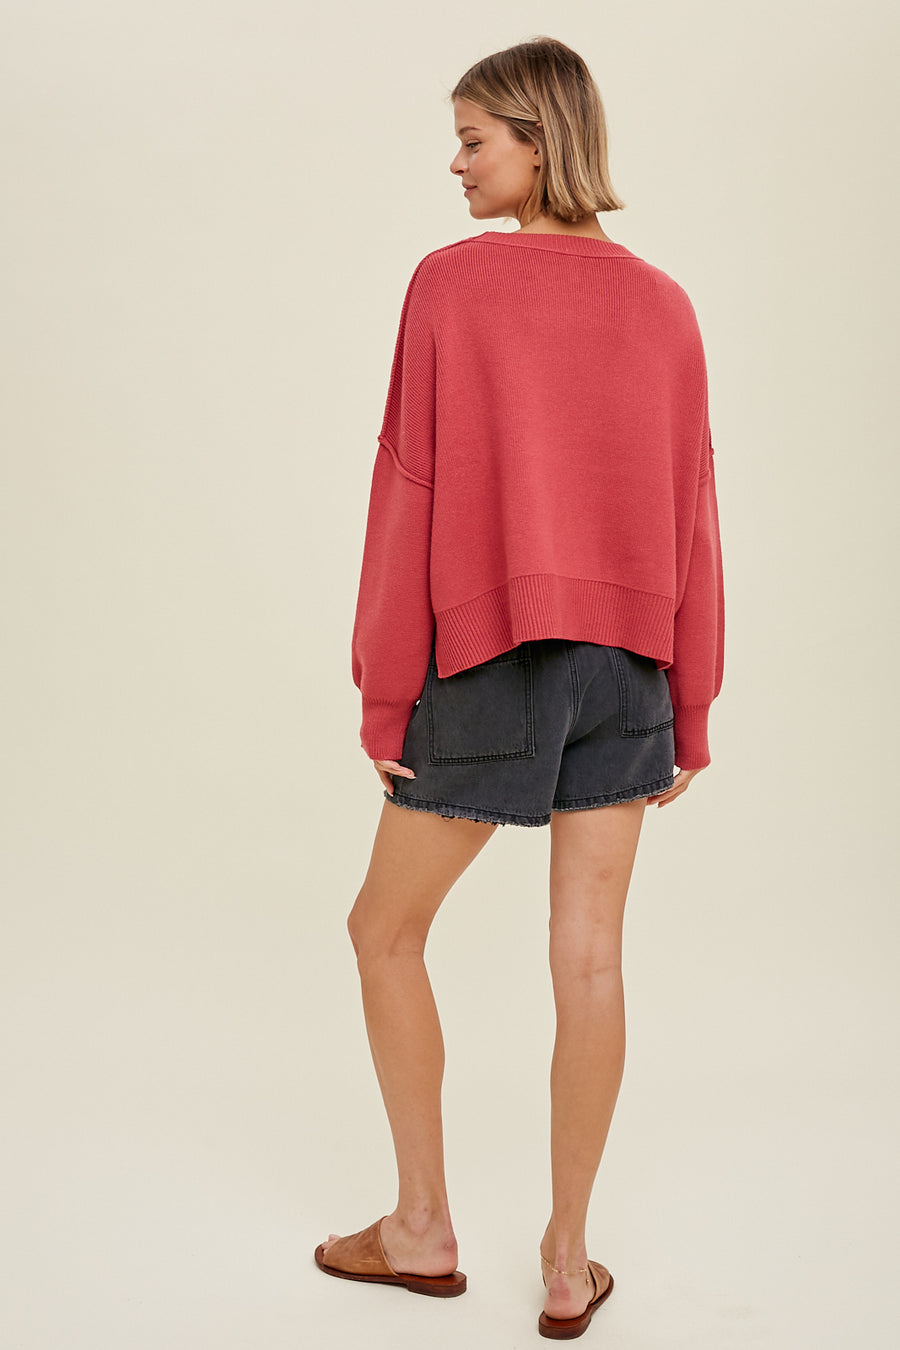 Makes Me Happy Berry Crop Sweater